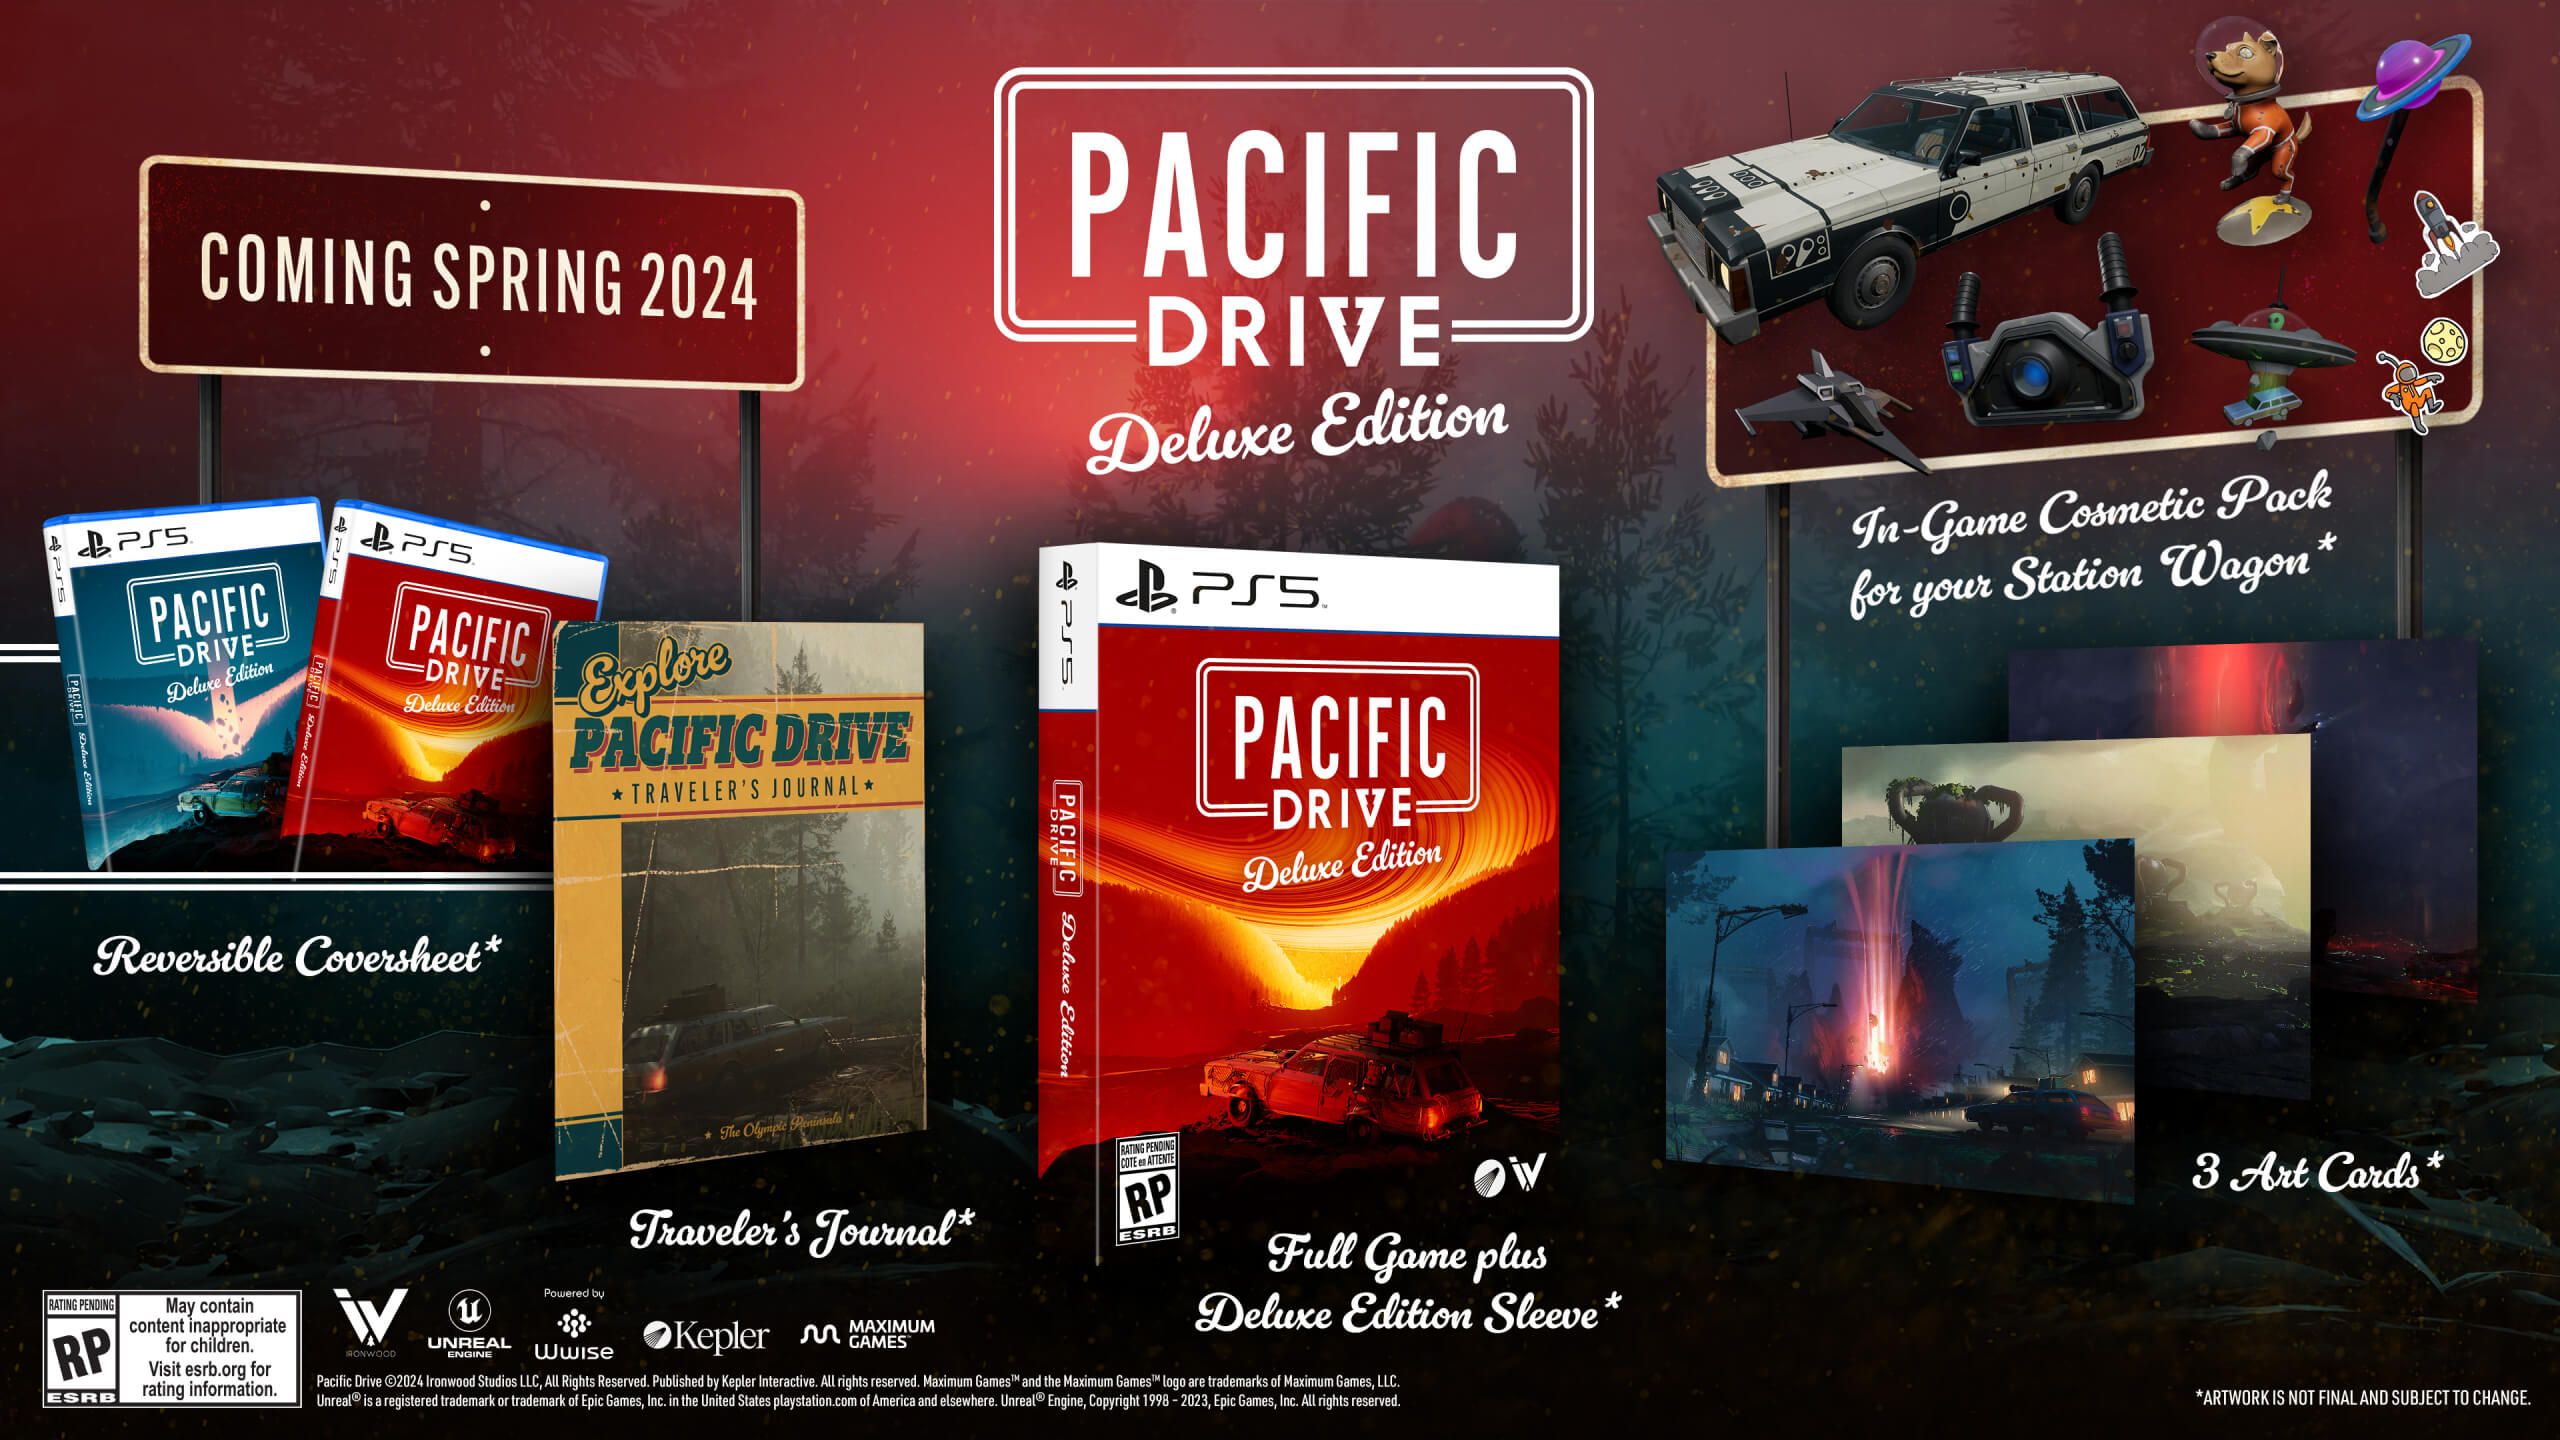 PacificDrive_BeautyShot-US-scaled